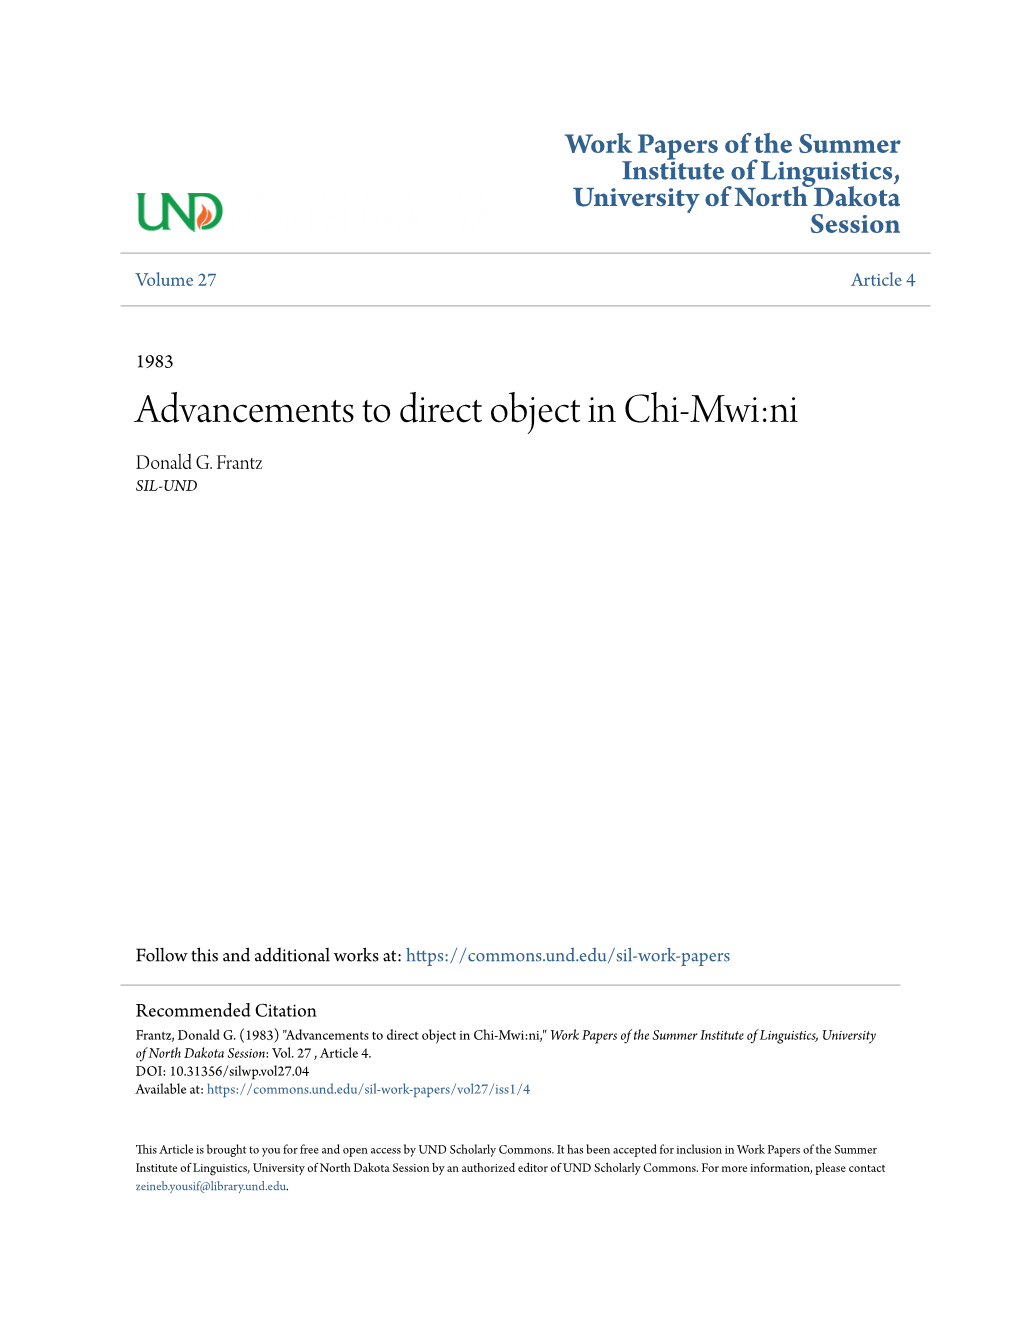 Advancements to Direct Object in Chi-Mwi:Ni Donald G